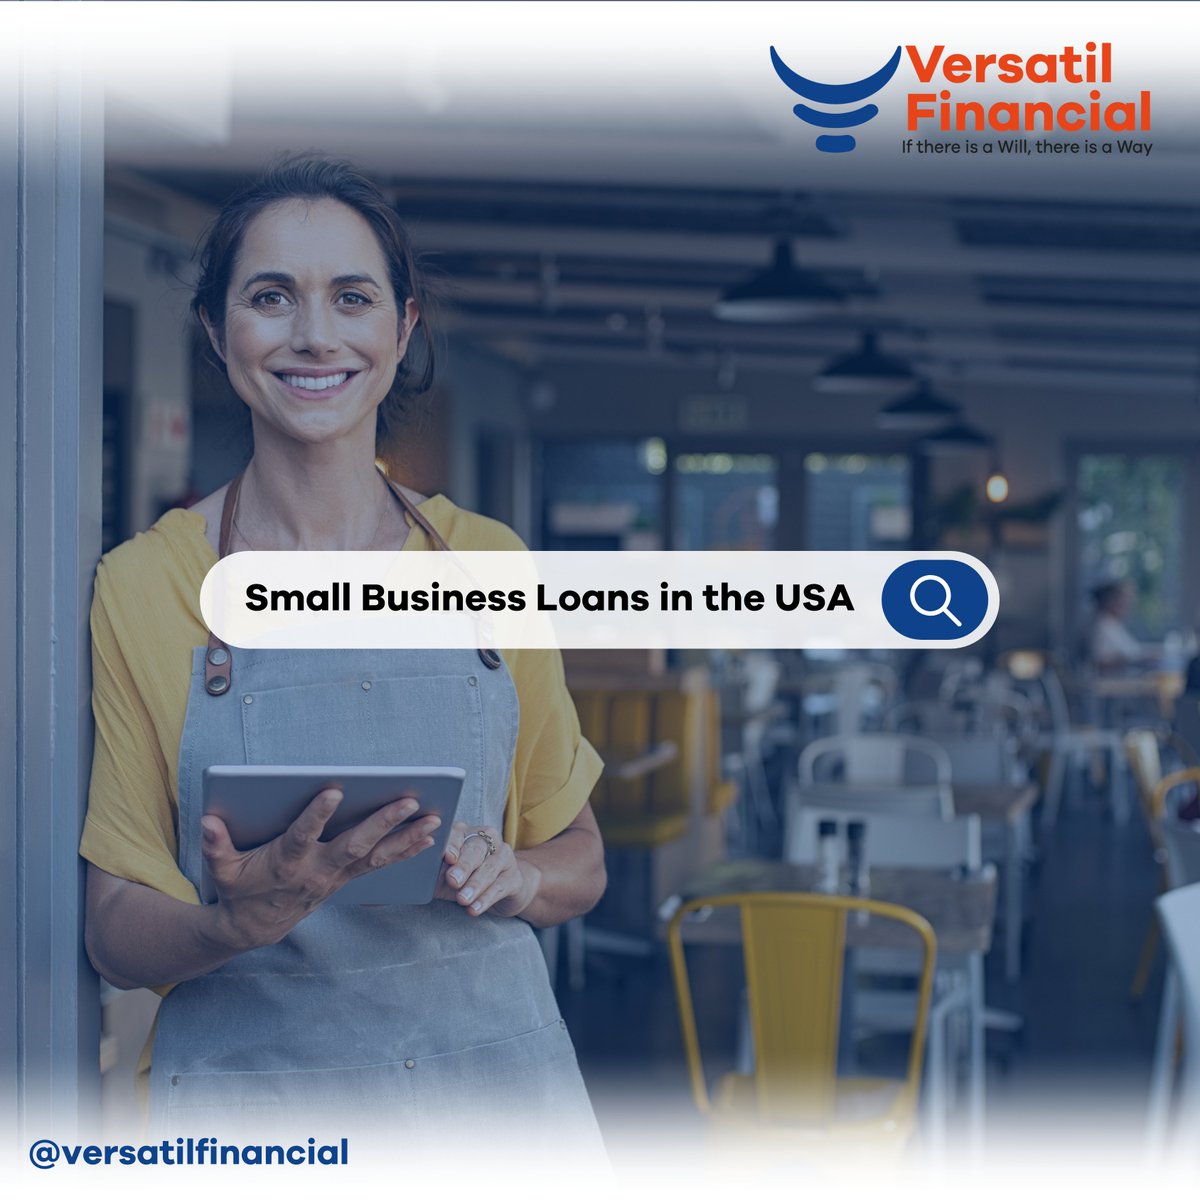 If you're struggling with the process of applying for a #smallbusinessloan look no further. Allow me to break down each step and simplify the process for you. Let's connect now and get started!
#trendingtwitter